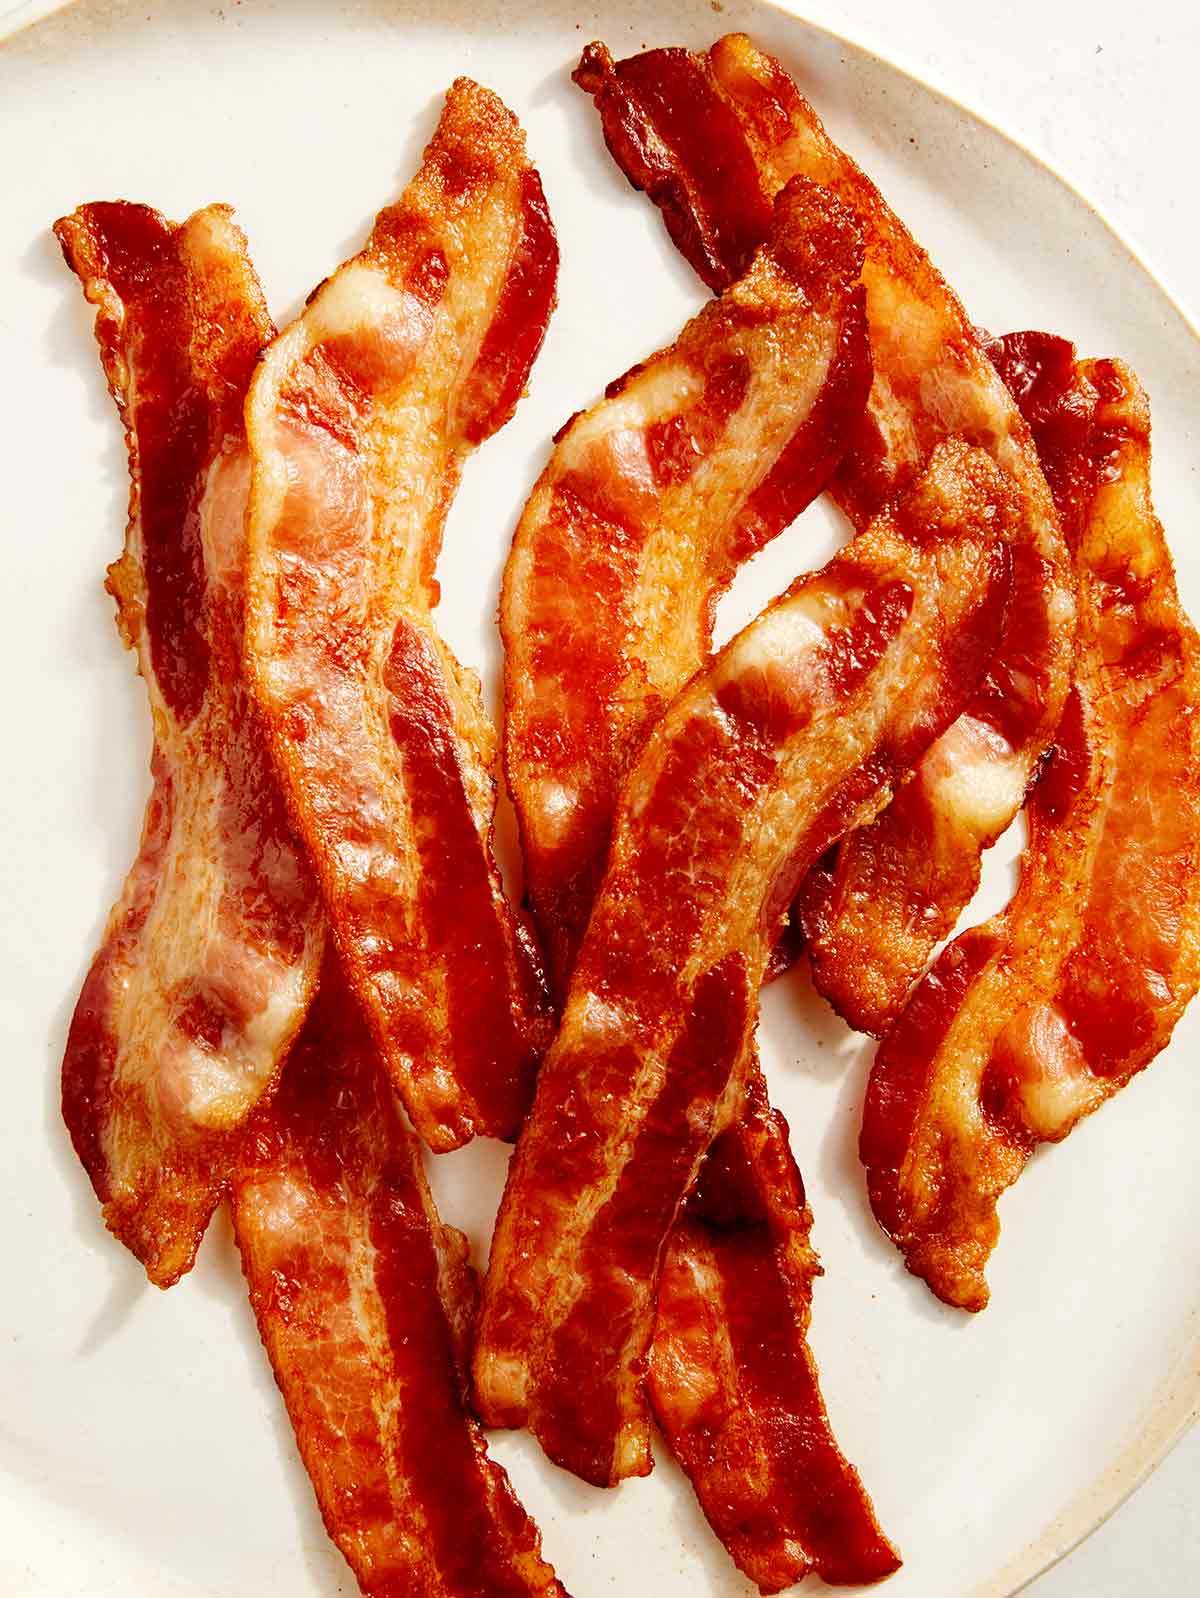 https://www.spoonforkbacon.com/wp-content/uploads/2023/02/bacon-cooked-in-the-oven.jpg